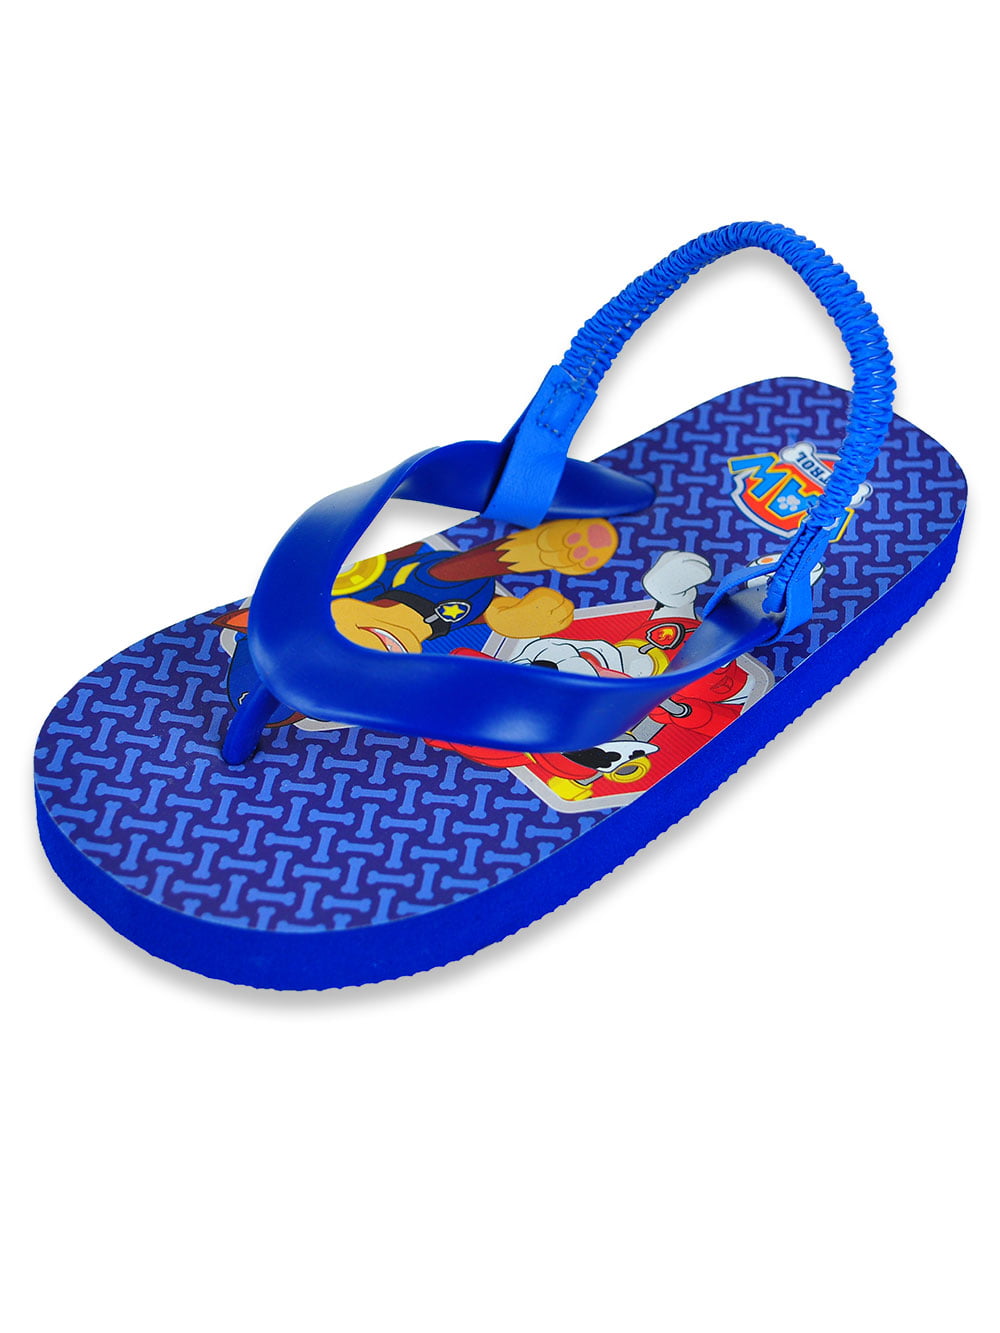 Paw Patrol Boy's Slip-on Clog Shoes with Backstrap Chase Marshall Blue size12 